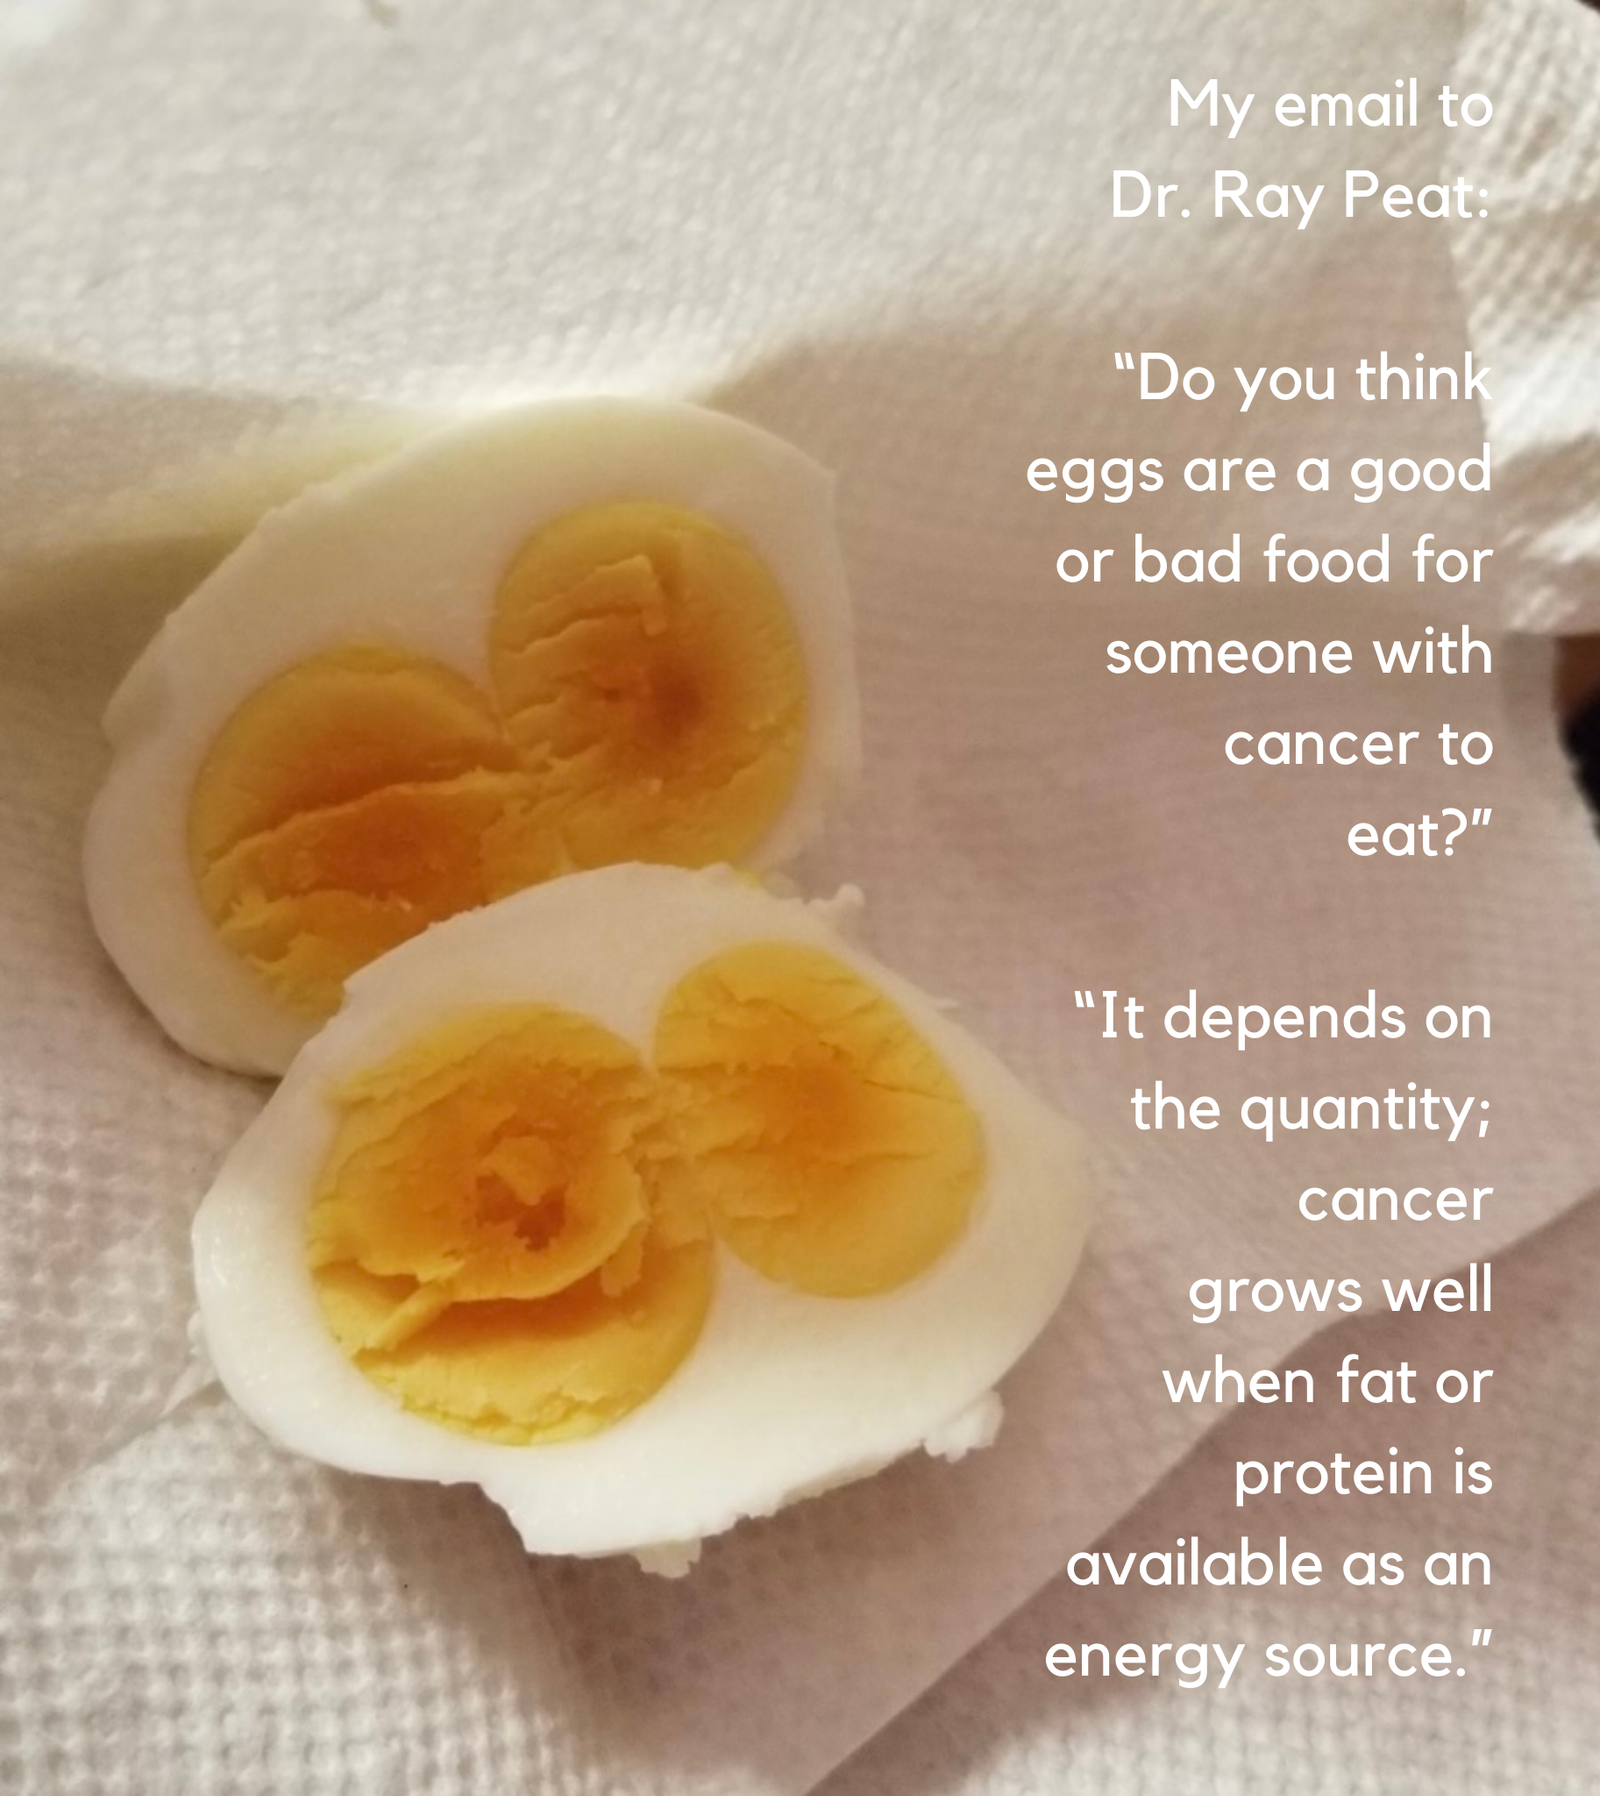 My email to Dr. Ray Peat: "Do you think eggs are a good or bad food for someone with cancer to eat?" "It depends on the quantity: cancer grows well when fat or protein is available as an energy source